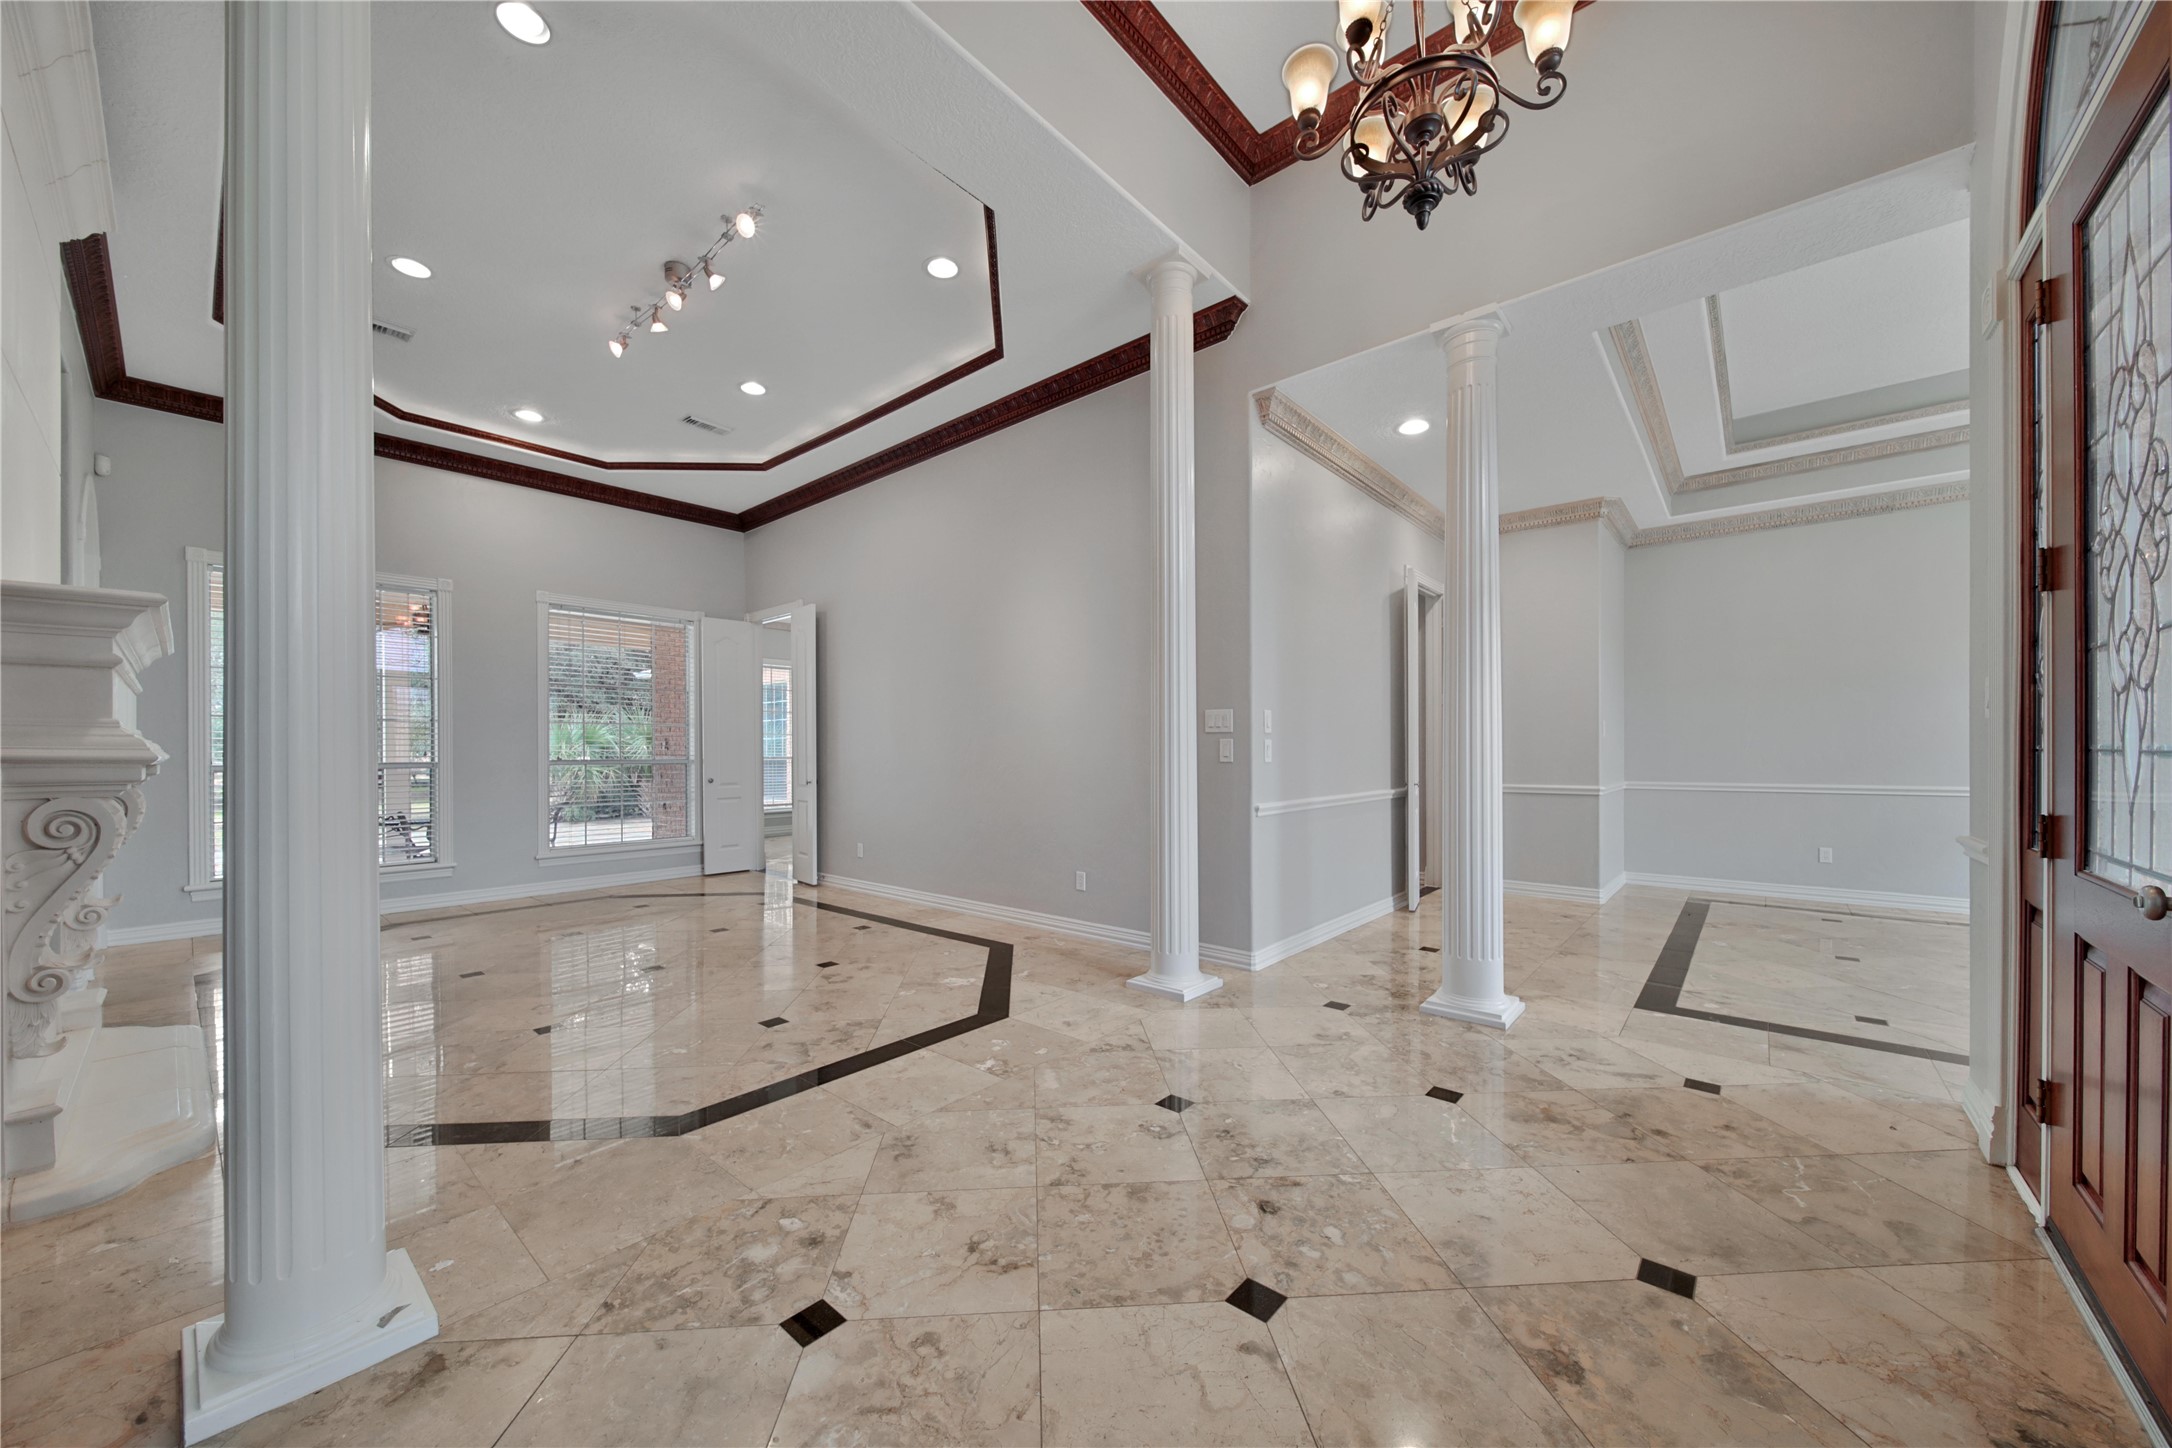 Foyer to formal living and formal dining